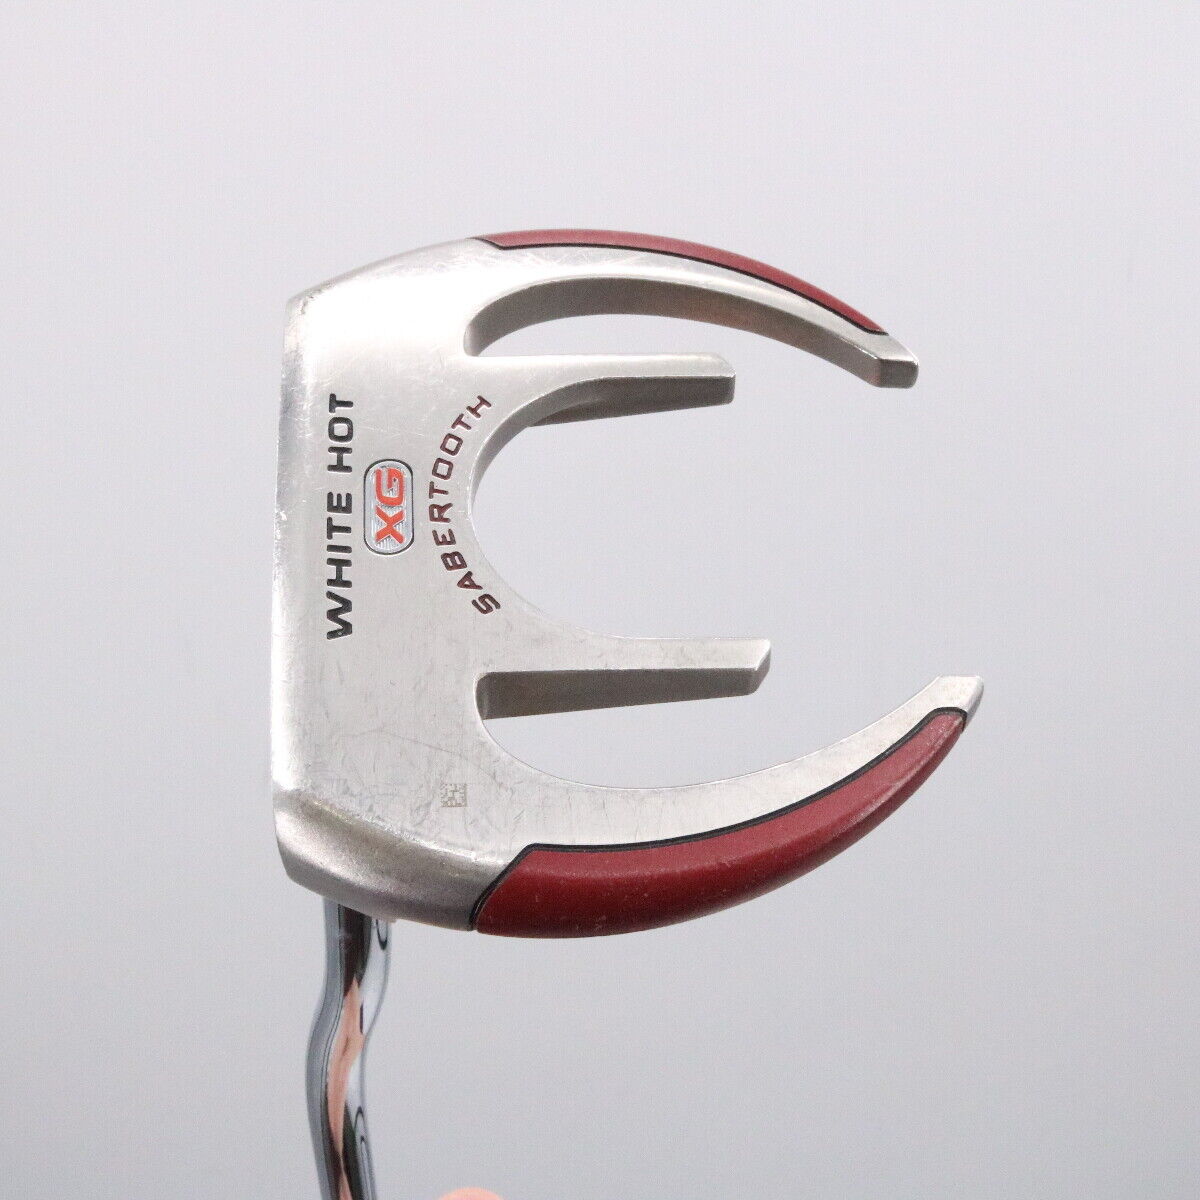 Odyssey White Hot XG Sabertooth Putter 32 Inches Left-Handed 75691D